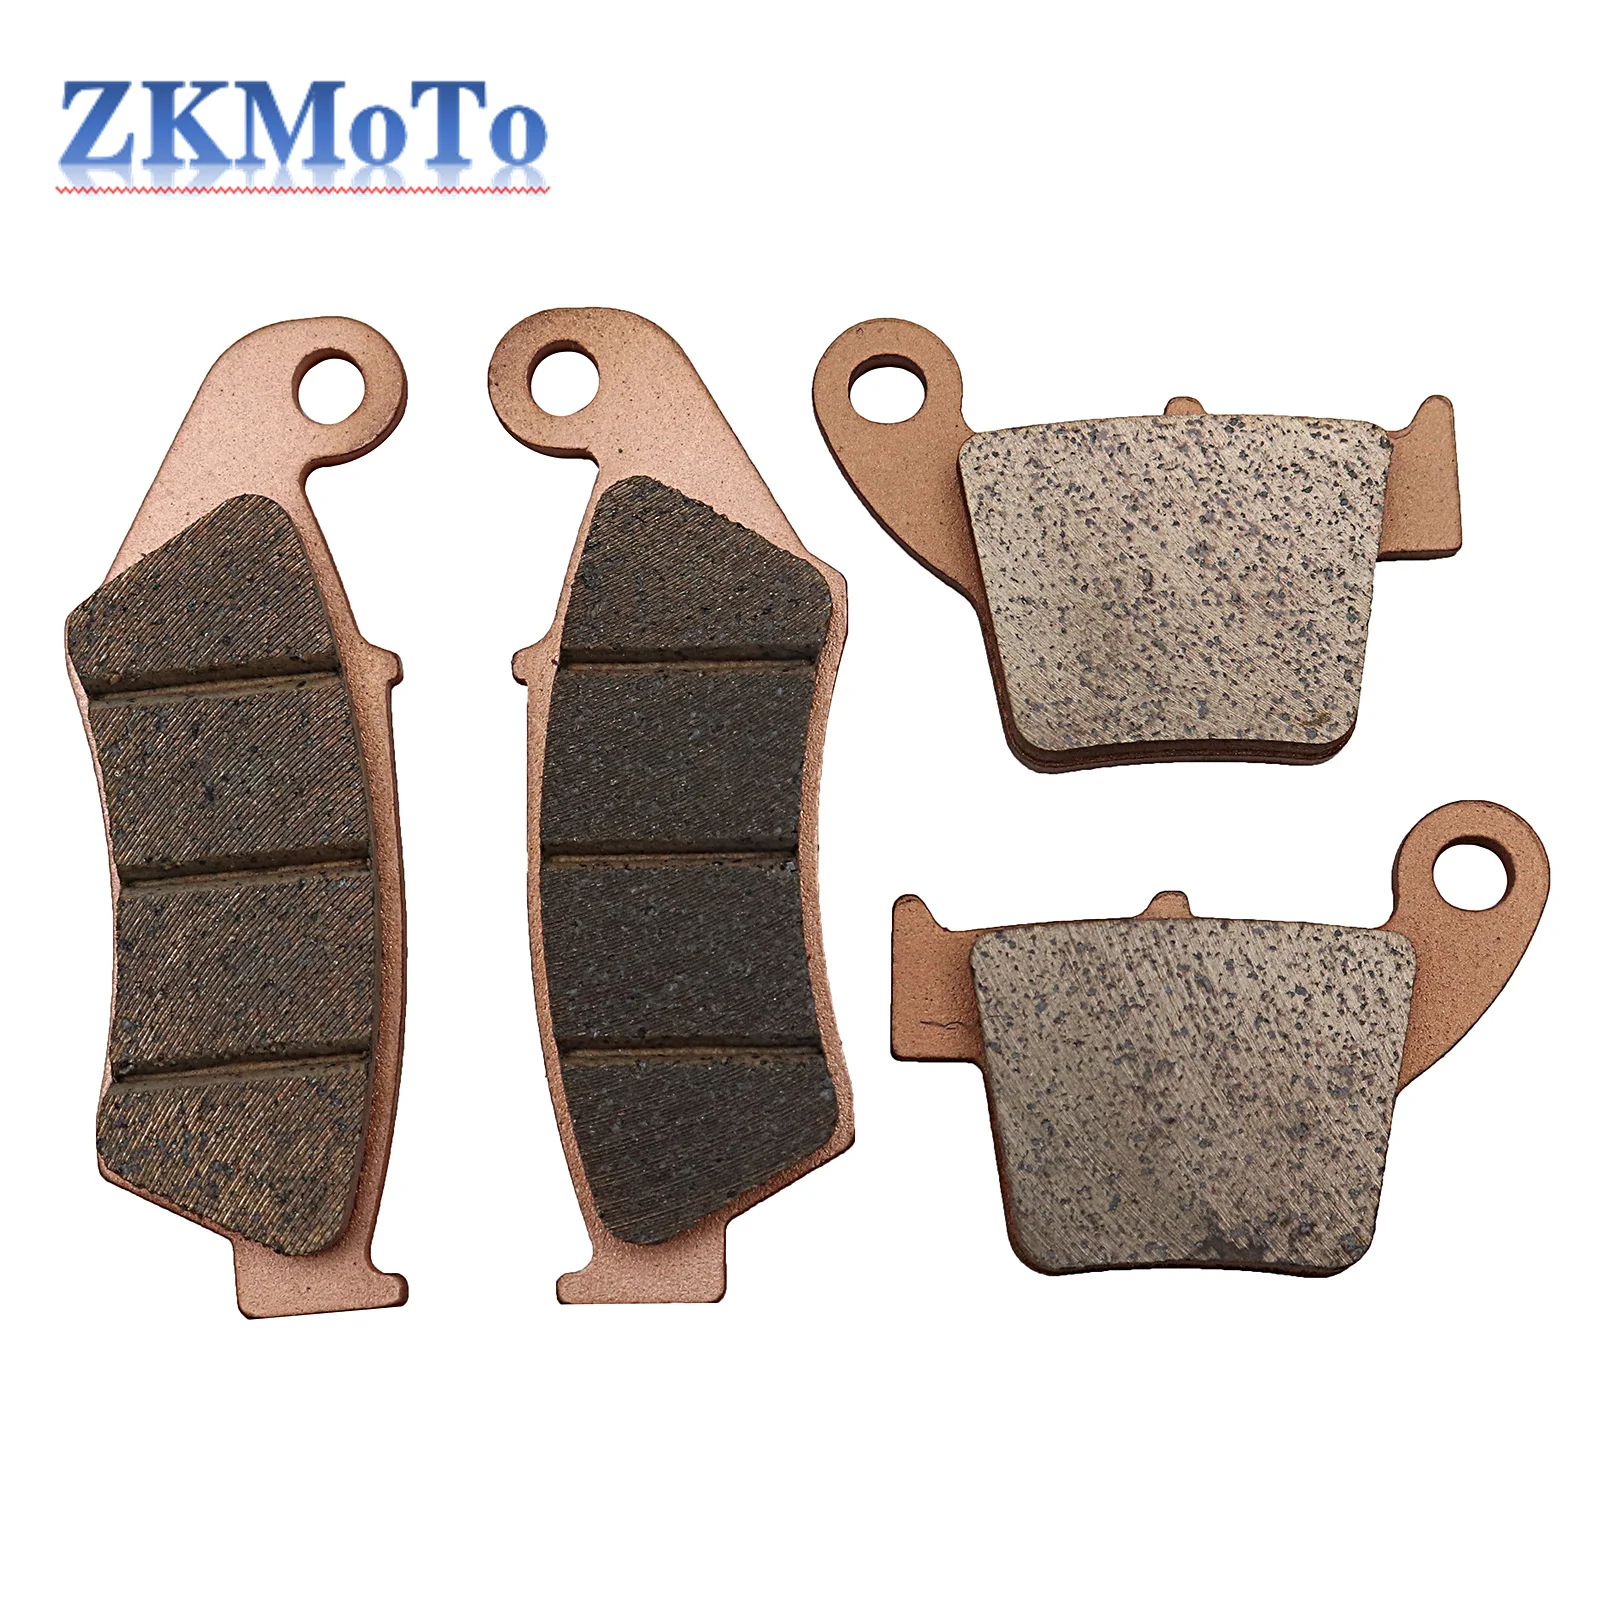 

Motorcycle Front and Rear Brake Pads For HONDA CRF250R CRF450R CR125R CR150R CRF 250R 450R 125R 450 R 450RX 450L 230F 2002-2022